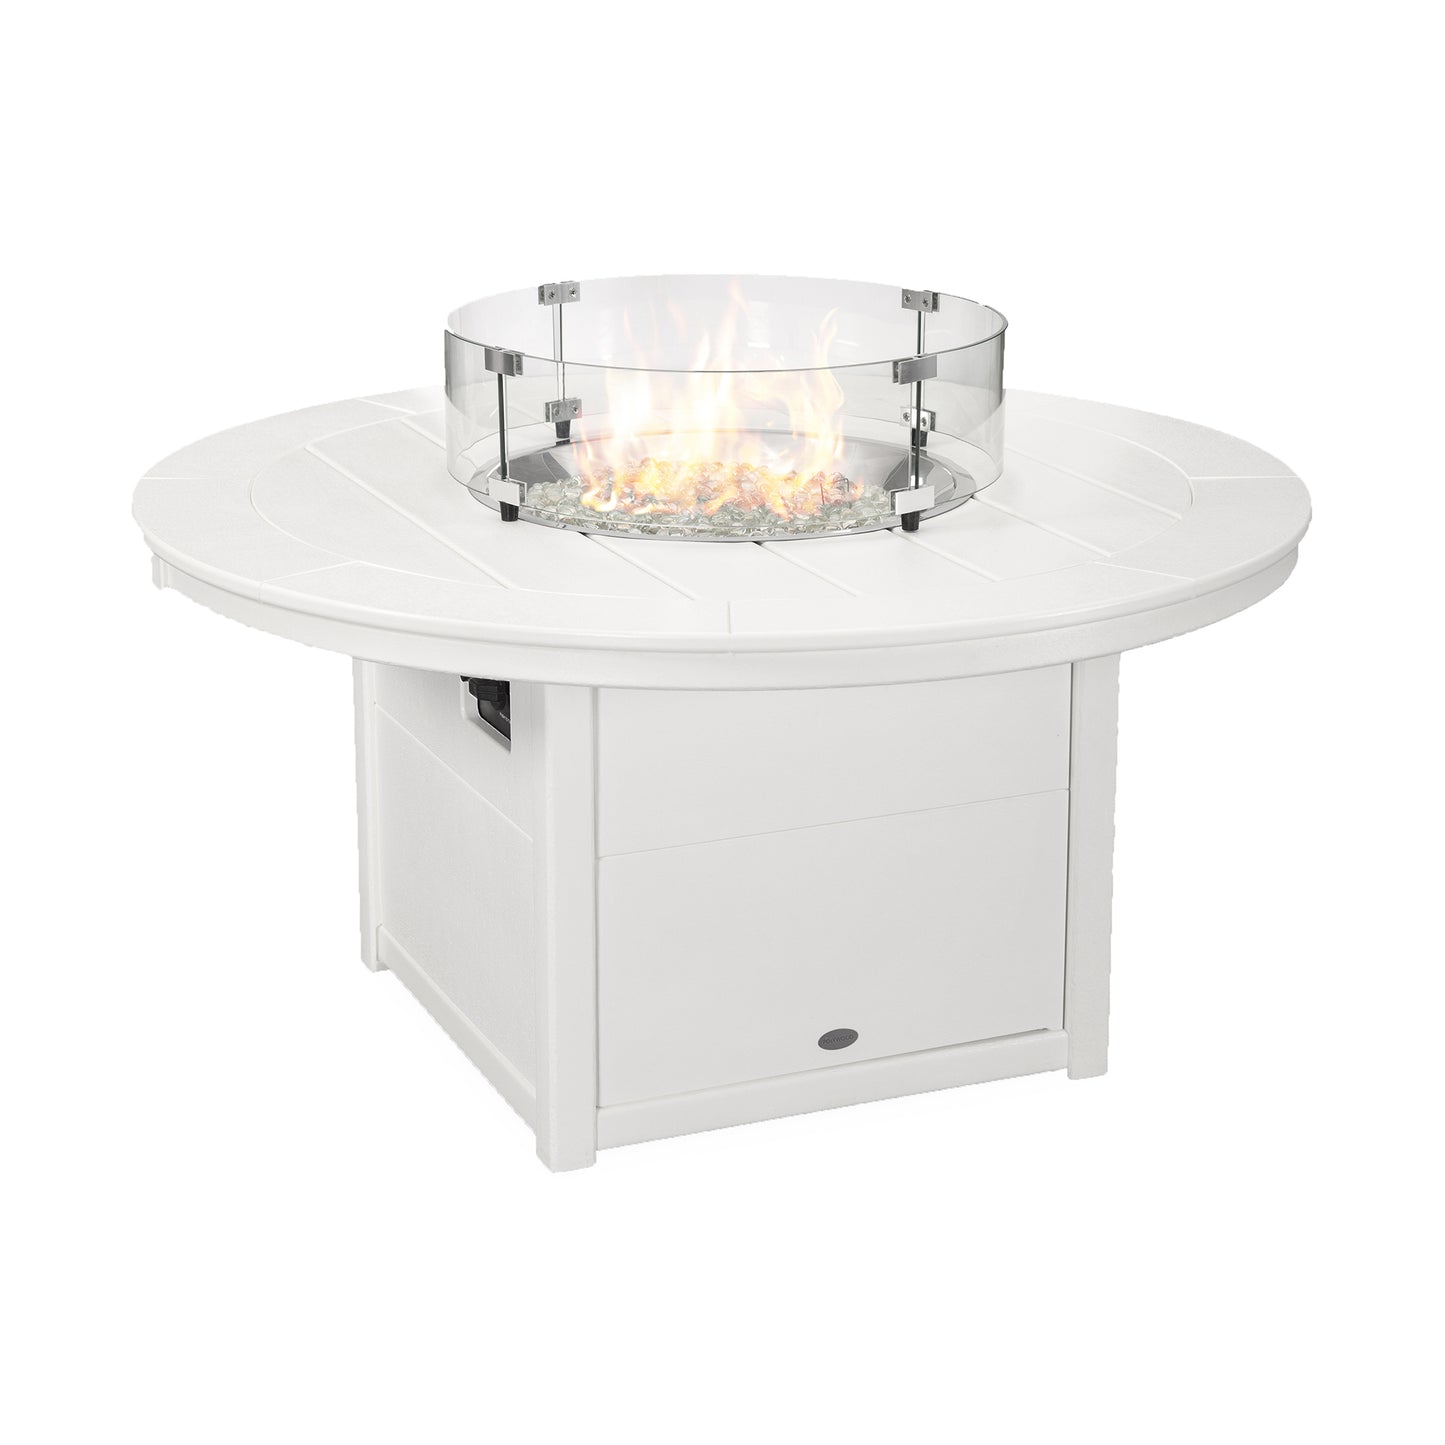 A Round 48" Fire Pit Table by POLYWOOD® with a glass top, perfect for creating outdoor ambiance.